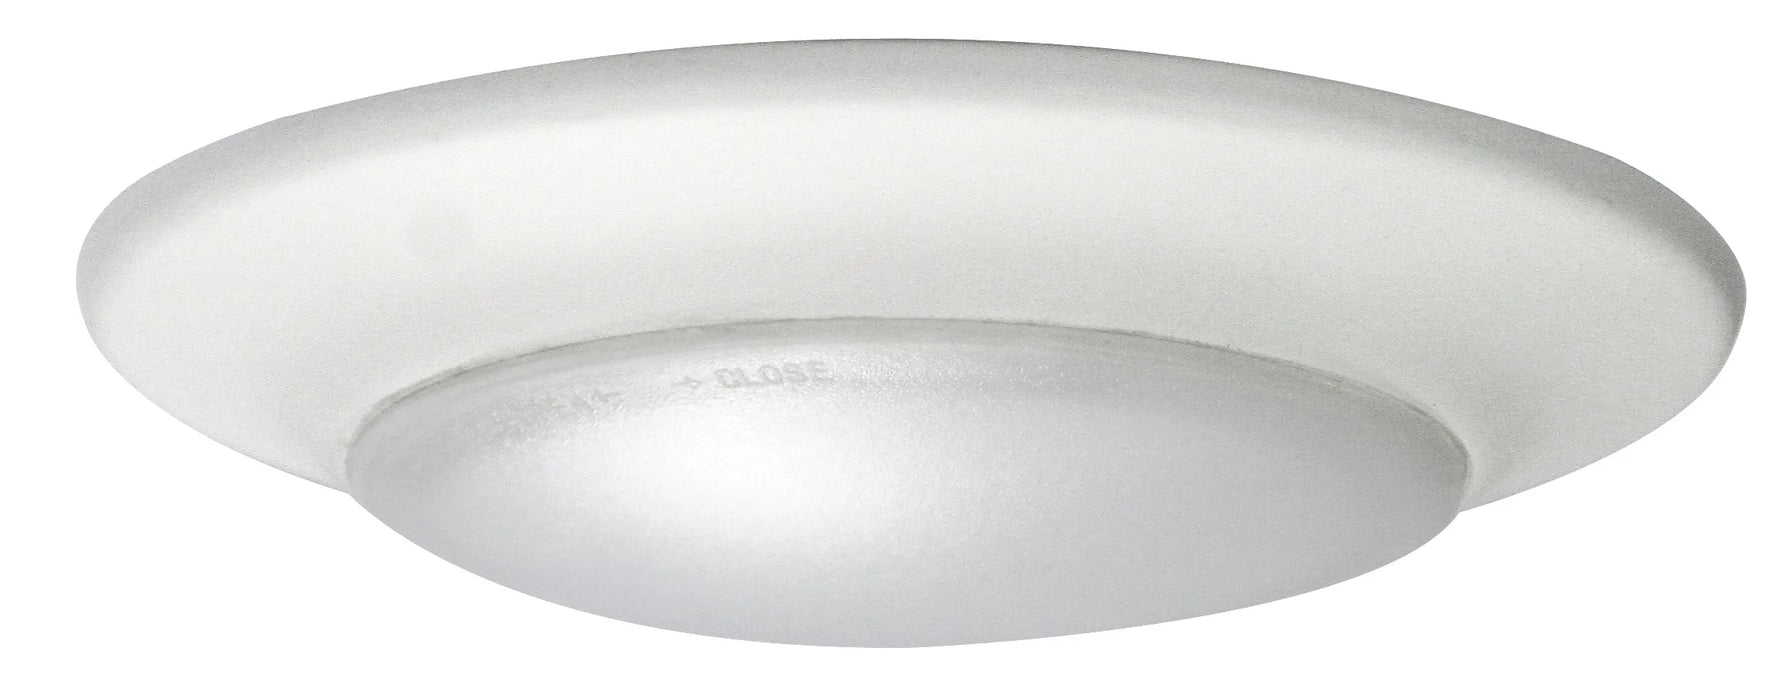 Royal Pacific 8556WH-90-4K 6 Inch Low Profile Disk Light 4000K